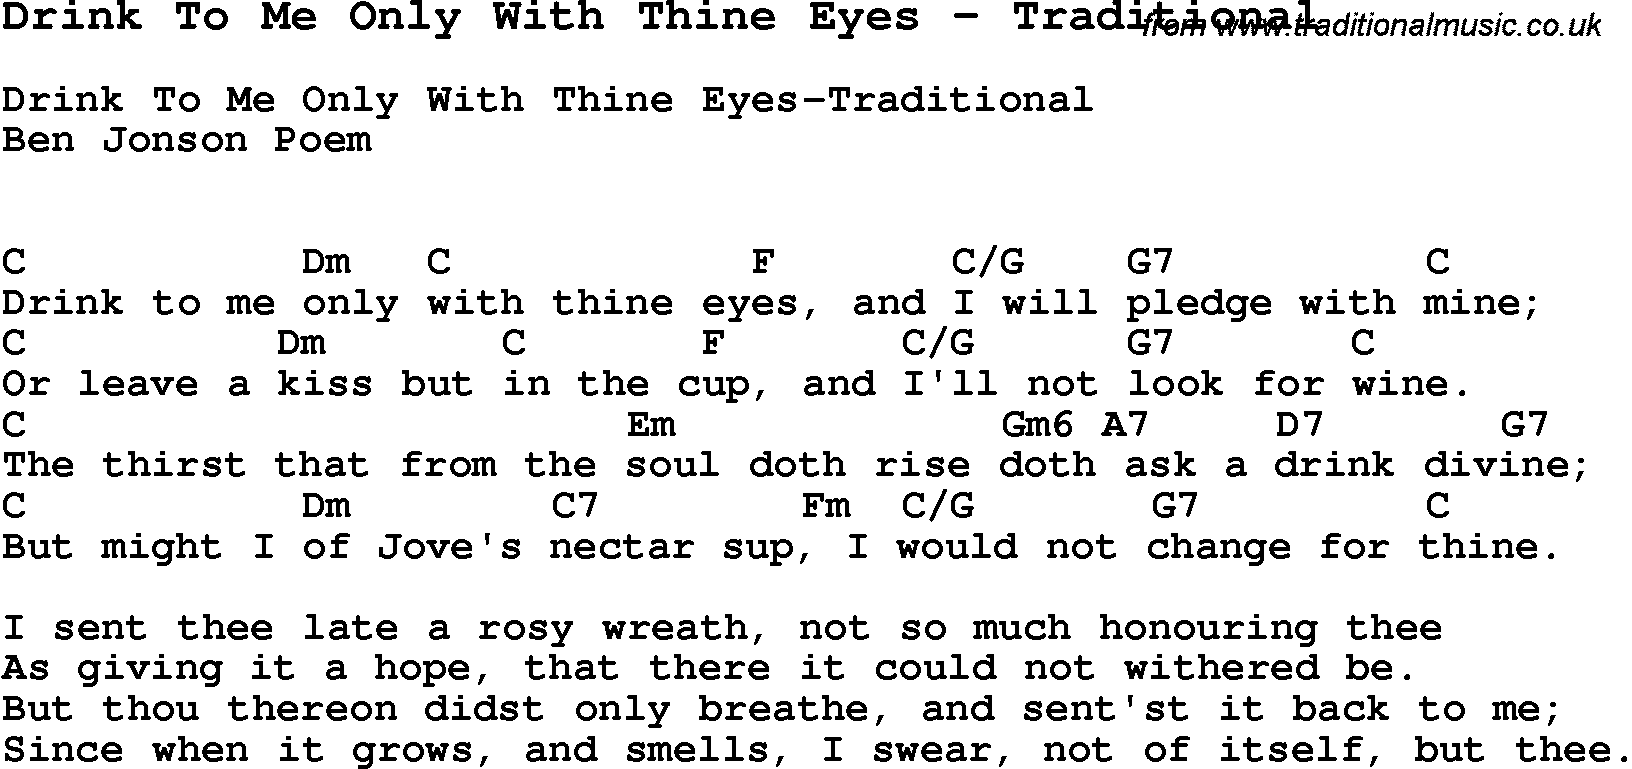 Song Drink To Me Only With Thine Eyes by Traditional, with lyrics for vocal performance and accompaniment chords for Ukulele, Guitar Banjo etc.